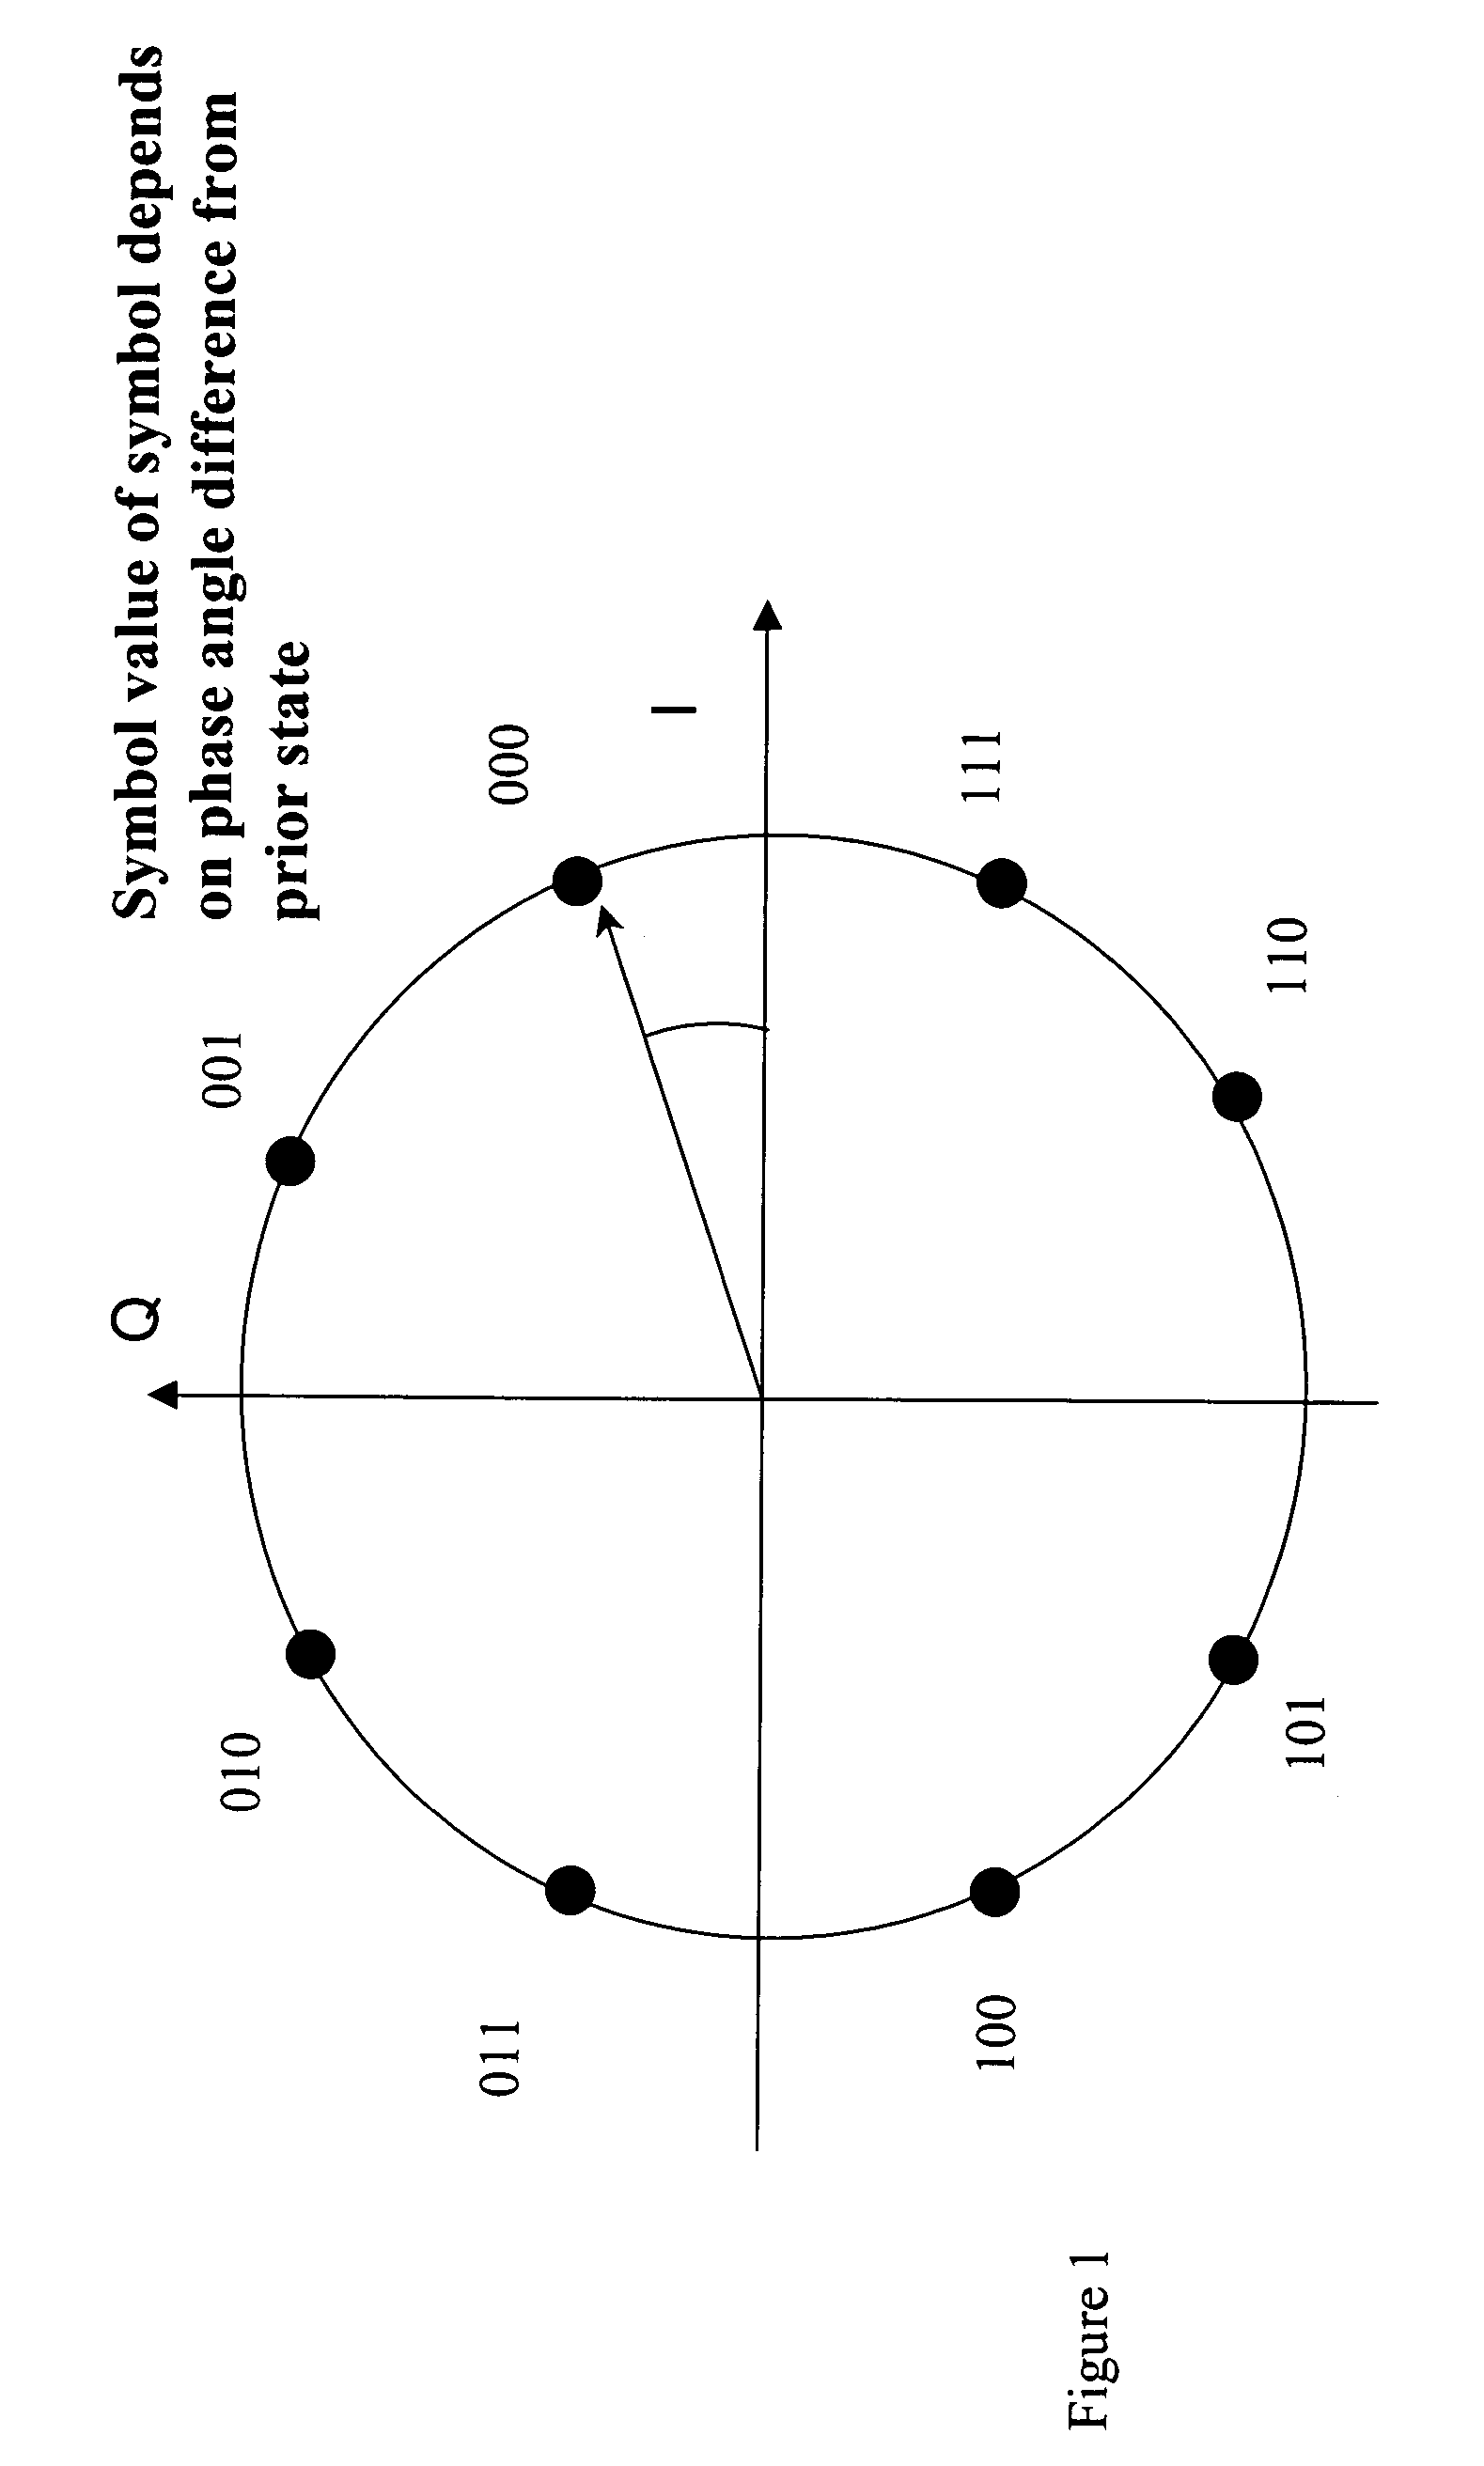 Computationally efficient demodulation for differential phase shift keying